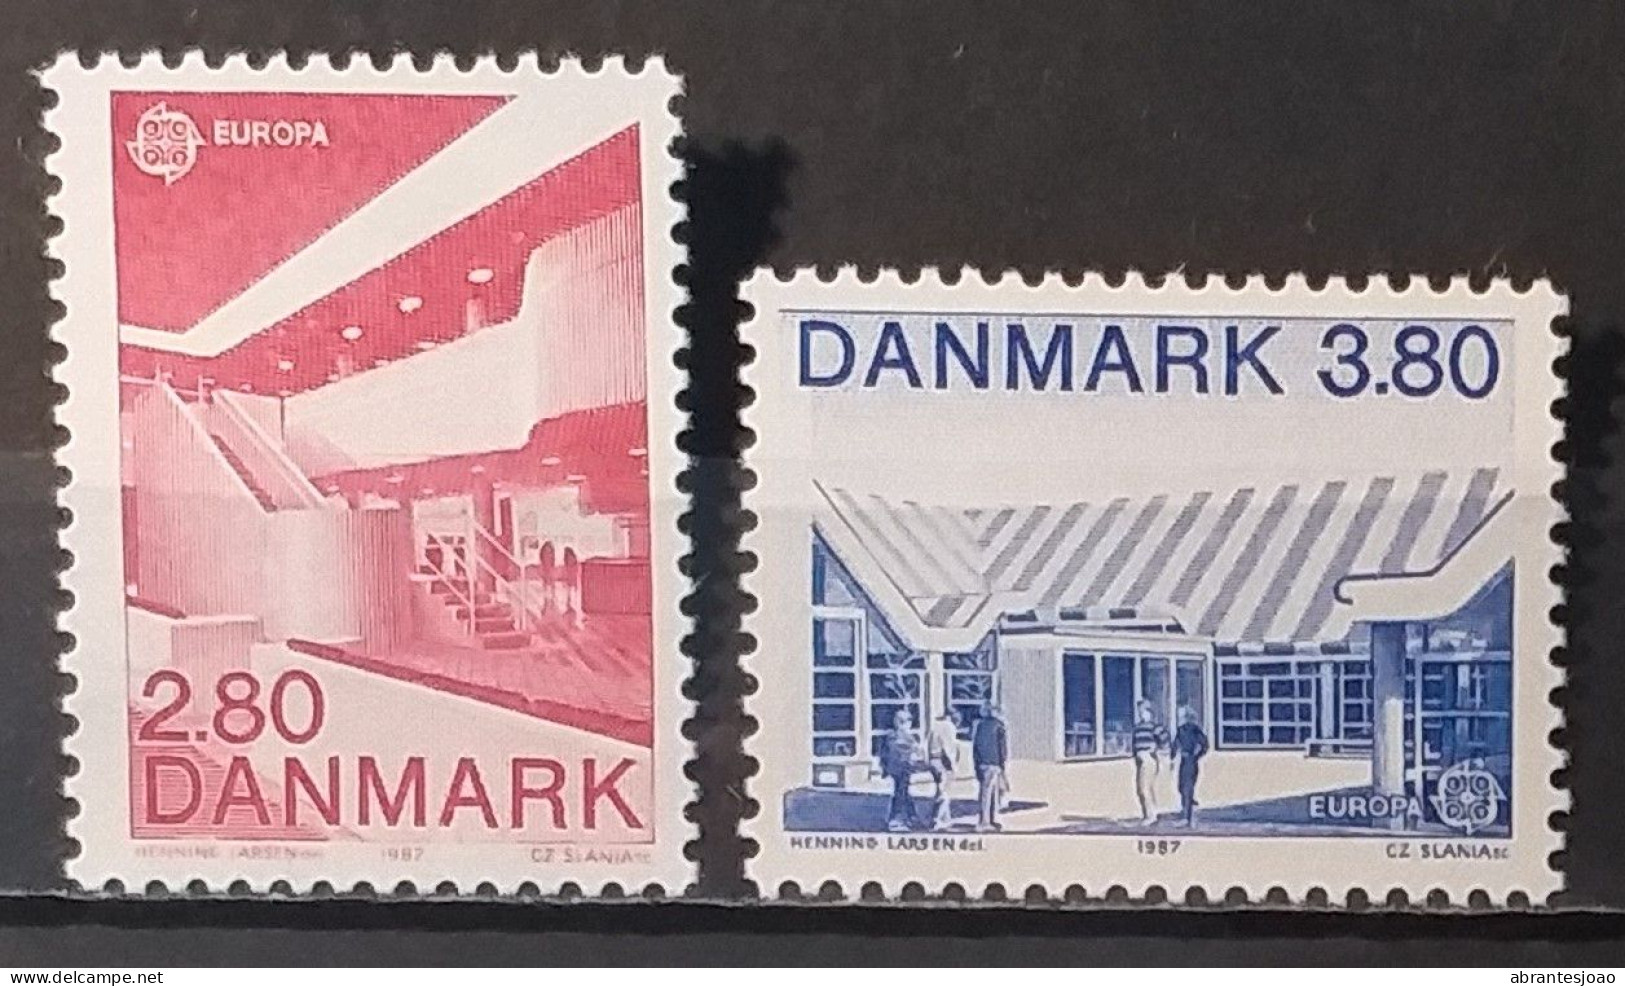 1984 - Denmark - MNH - Europa CEPT - 25 Years Of CEPT + 1987- ModernArchitecture - 4 Stamps - Nuovi